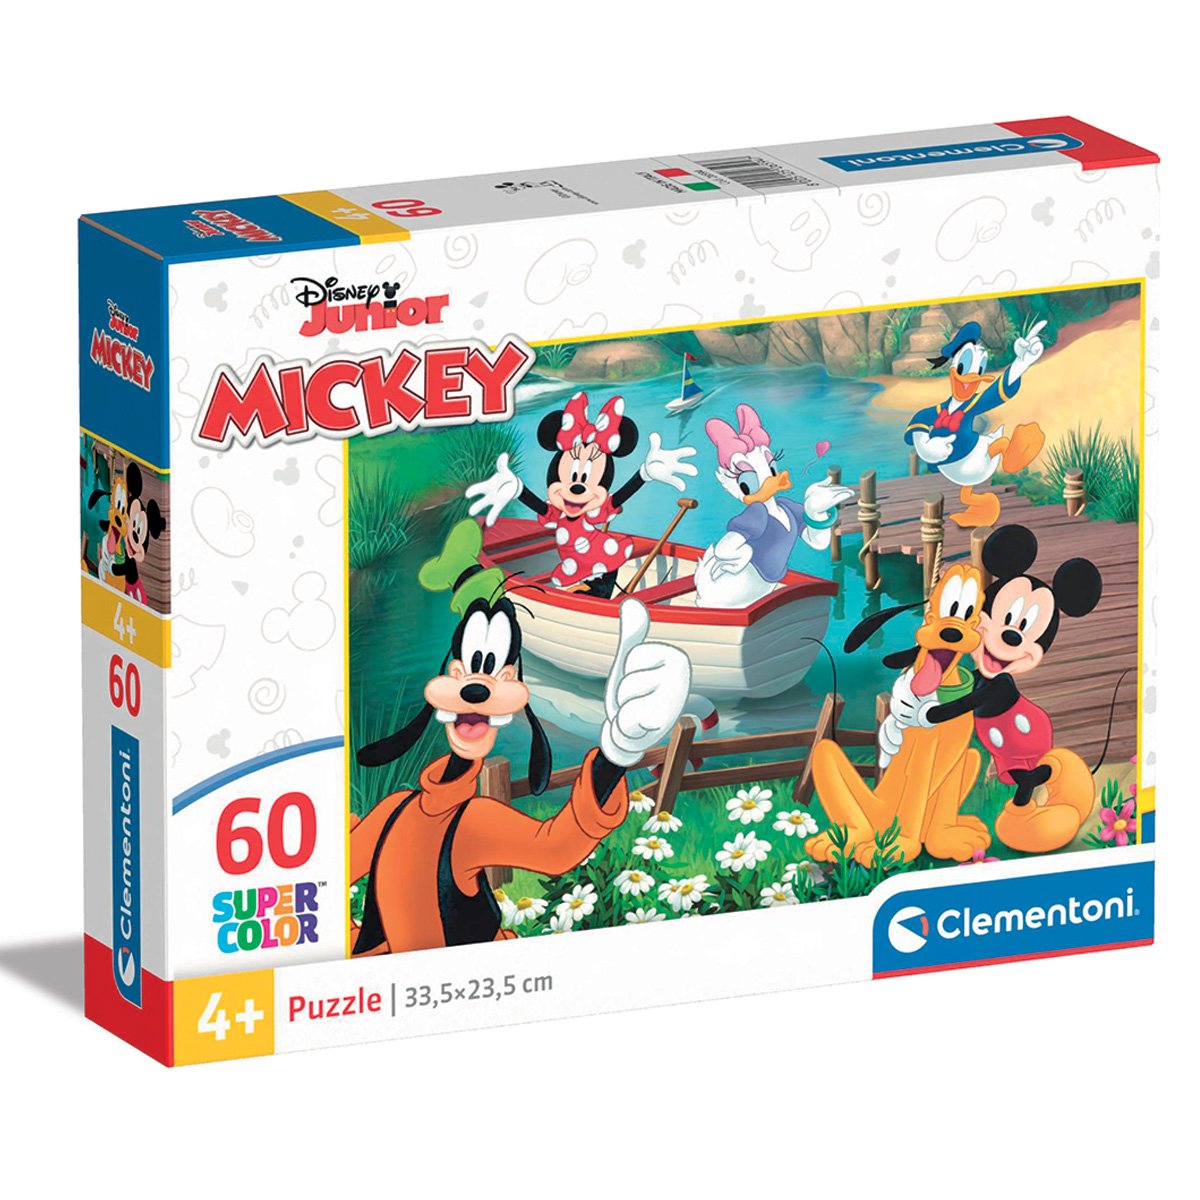 Puzzle Clementoni, Disney Mickey Mouse, 60 piese